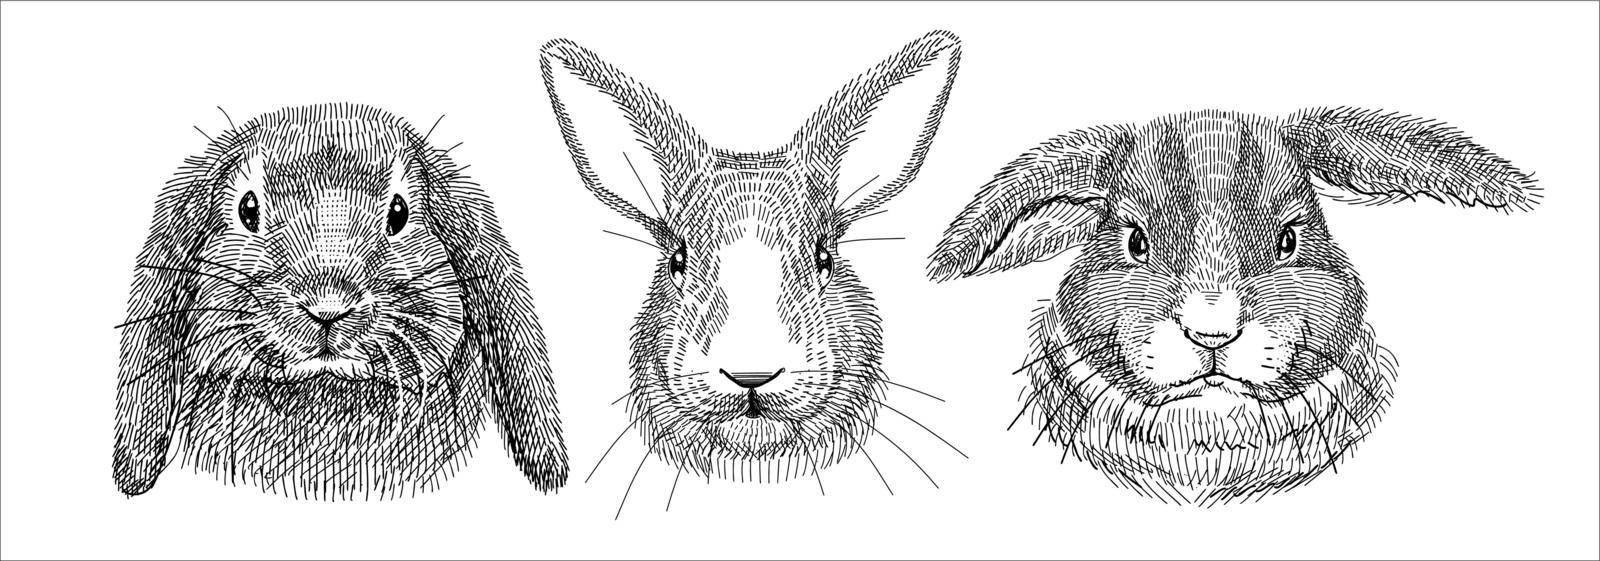 Black and white illustration, sketch drawn with a pen. Set of domestic rabbits, portraits of heads. Isolated background. by Manka